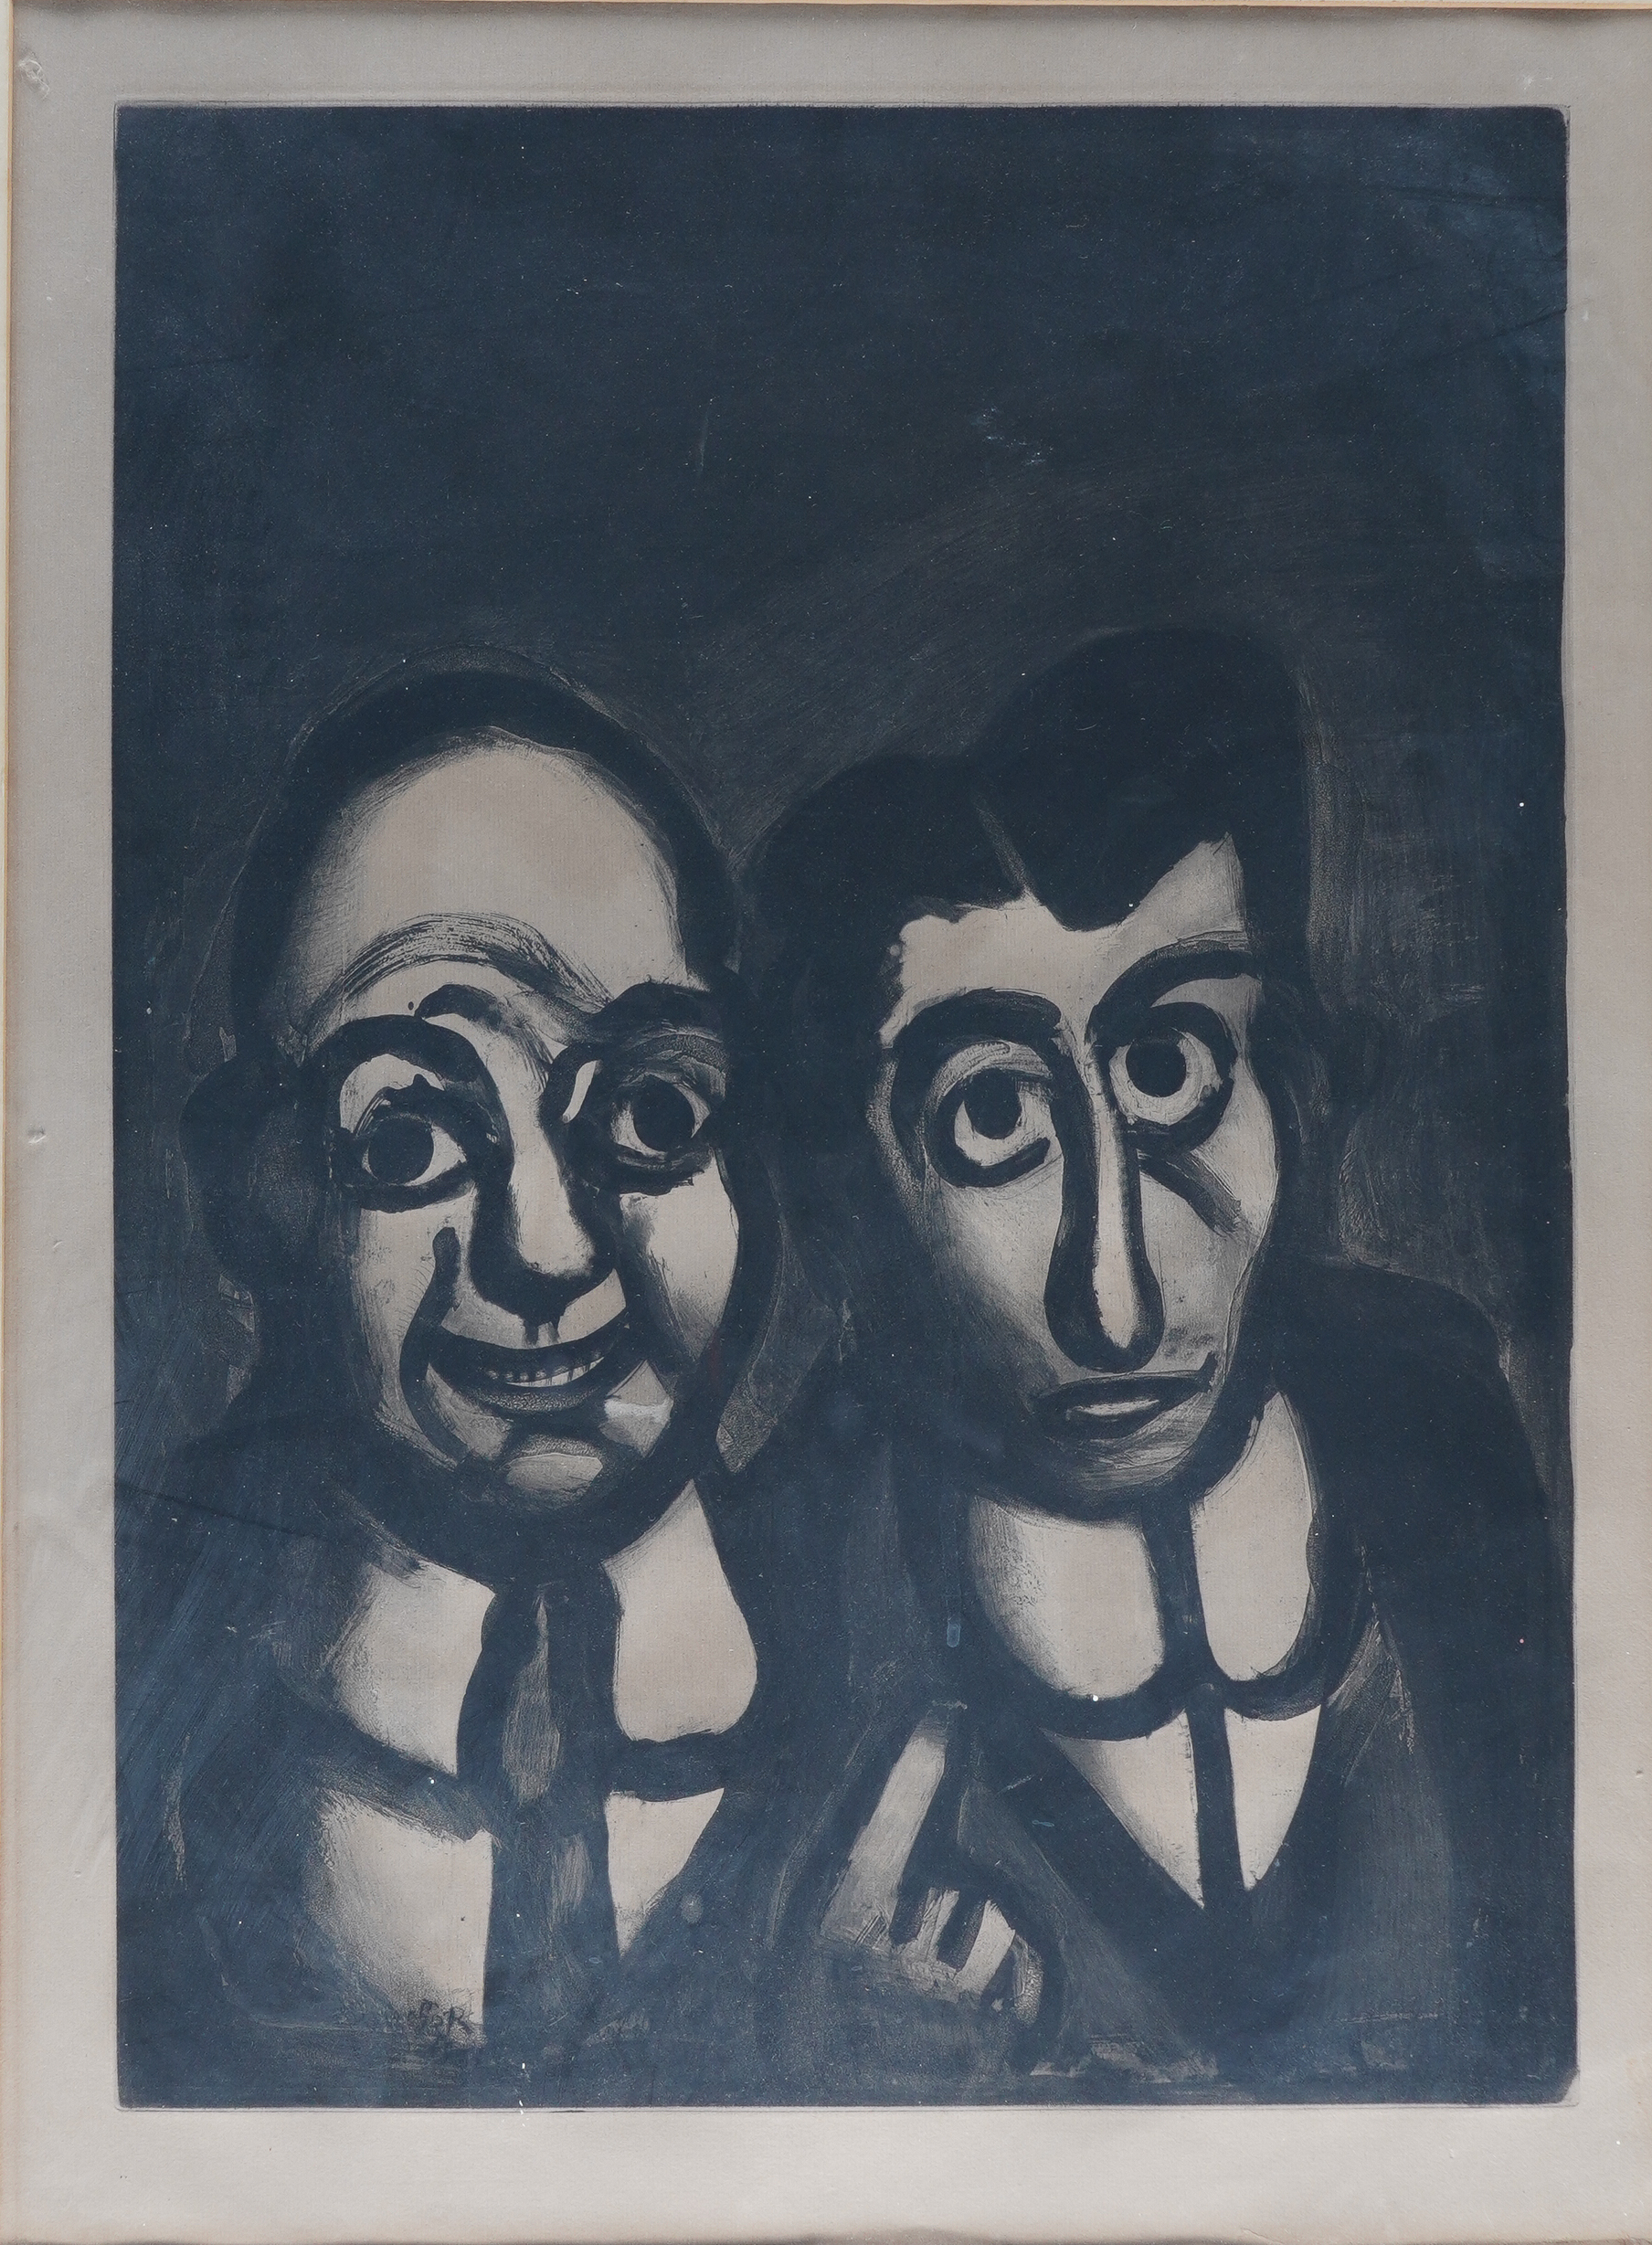 20TH CENTURY Untitled, Man and